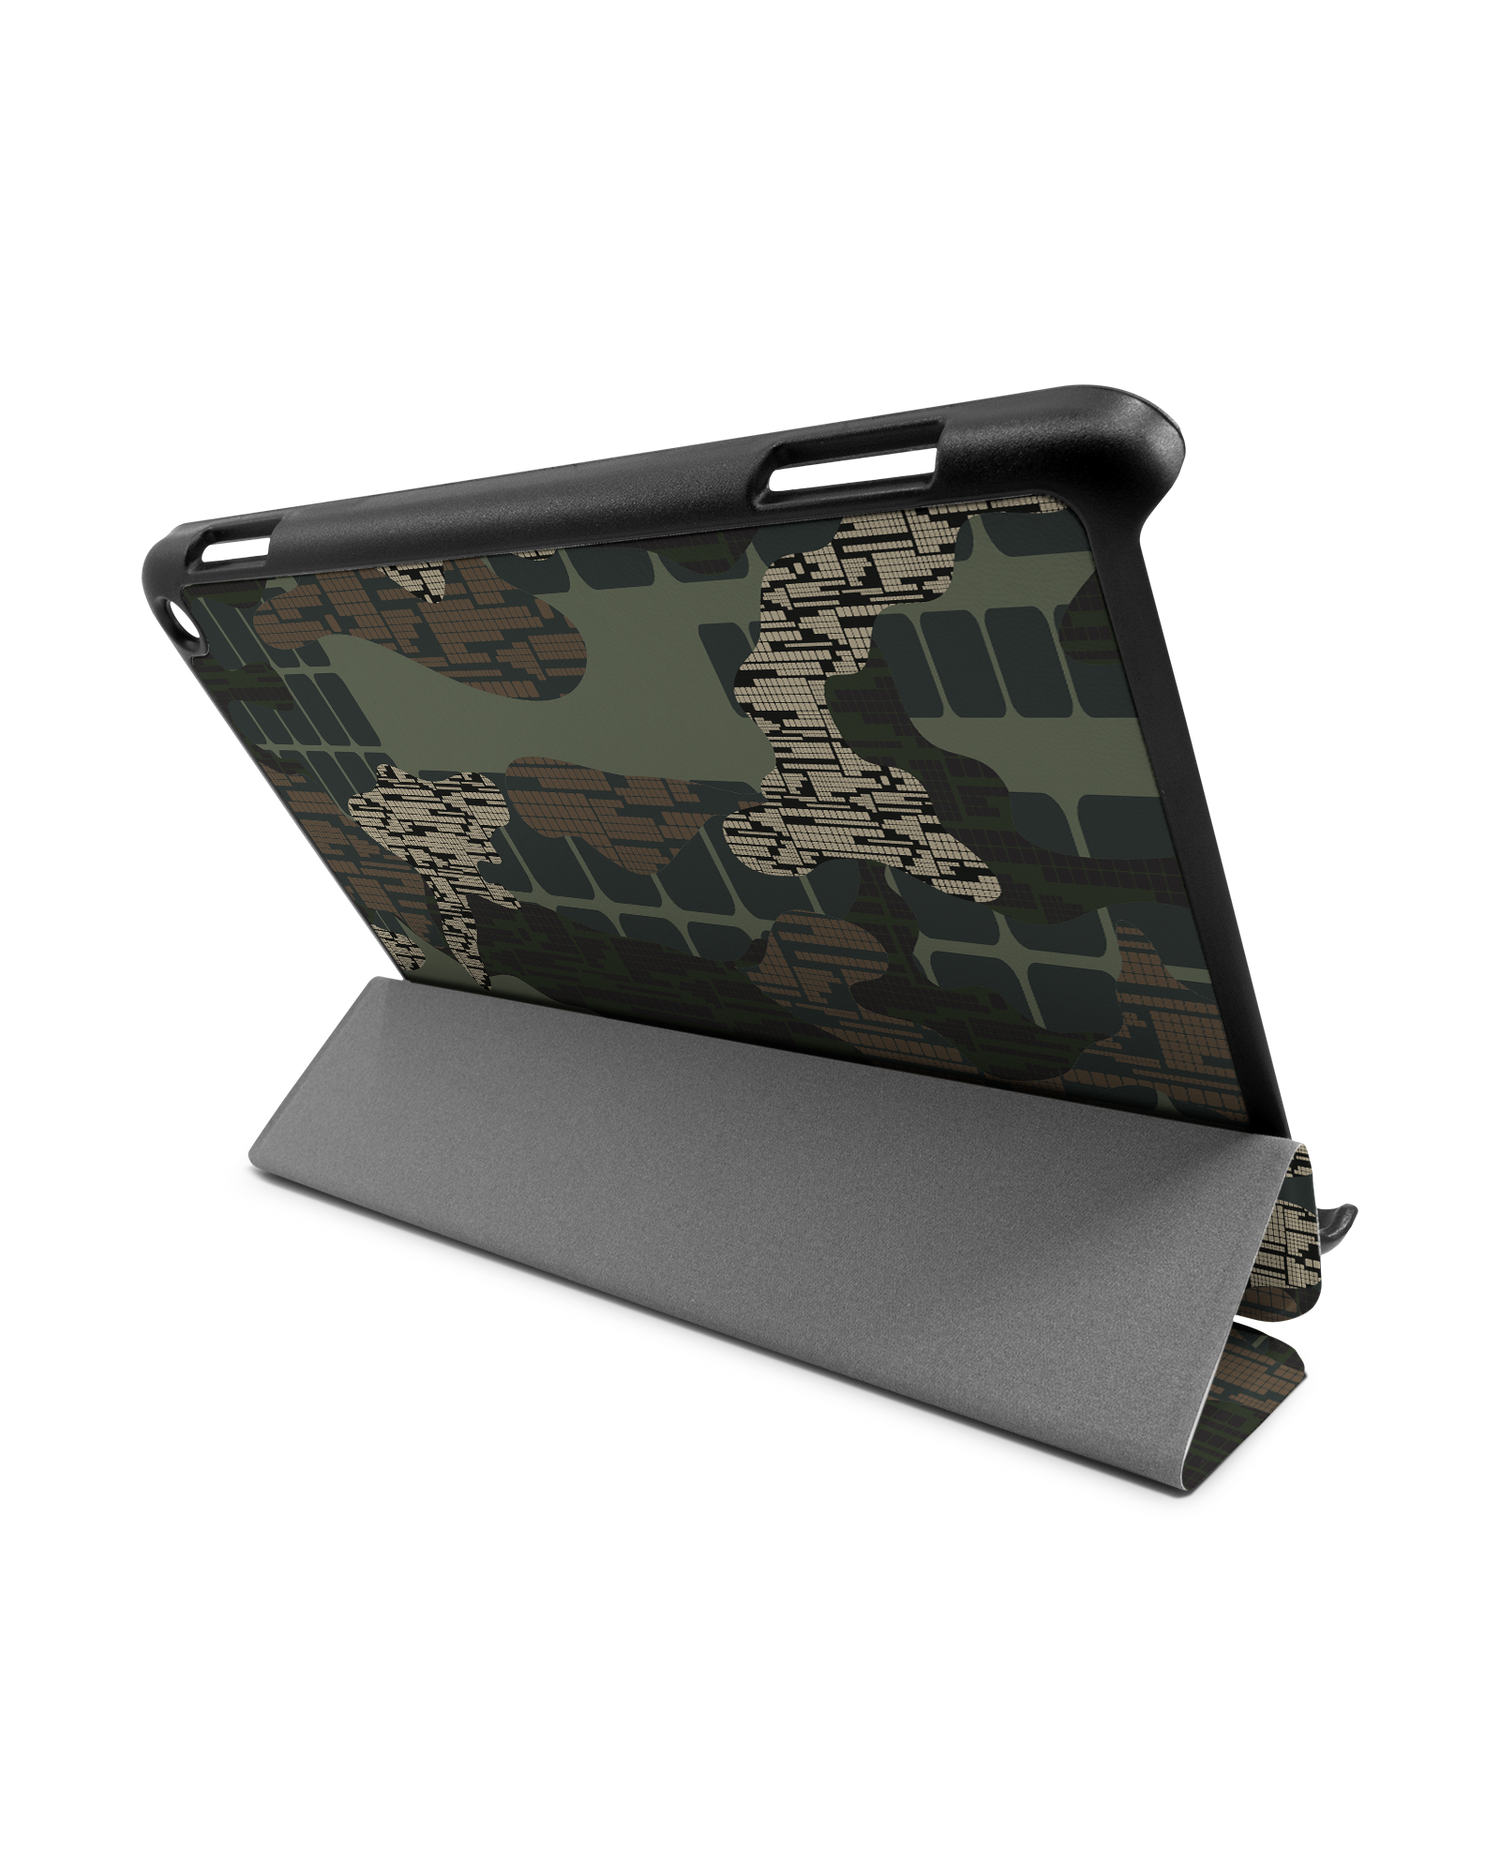 Green Camo Mix Tablet Smart Case for Amazon Fire HD 8 (2022), Amazon Fire HD 8 Plus (2022), Amazon Fire HD 8 (2020), Amazon Fire HD 8 Plus (2020): Used as Stand